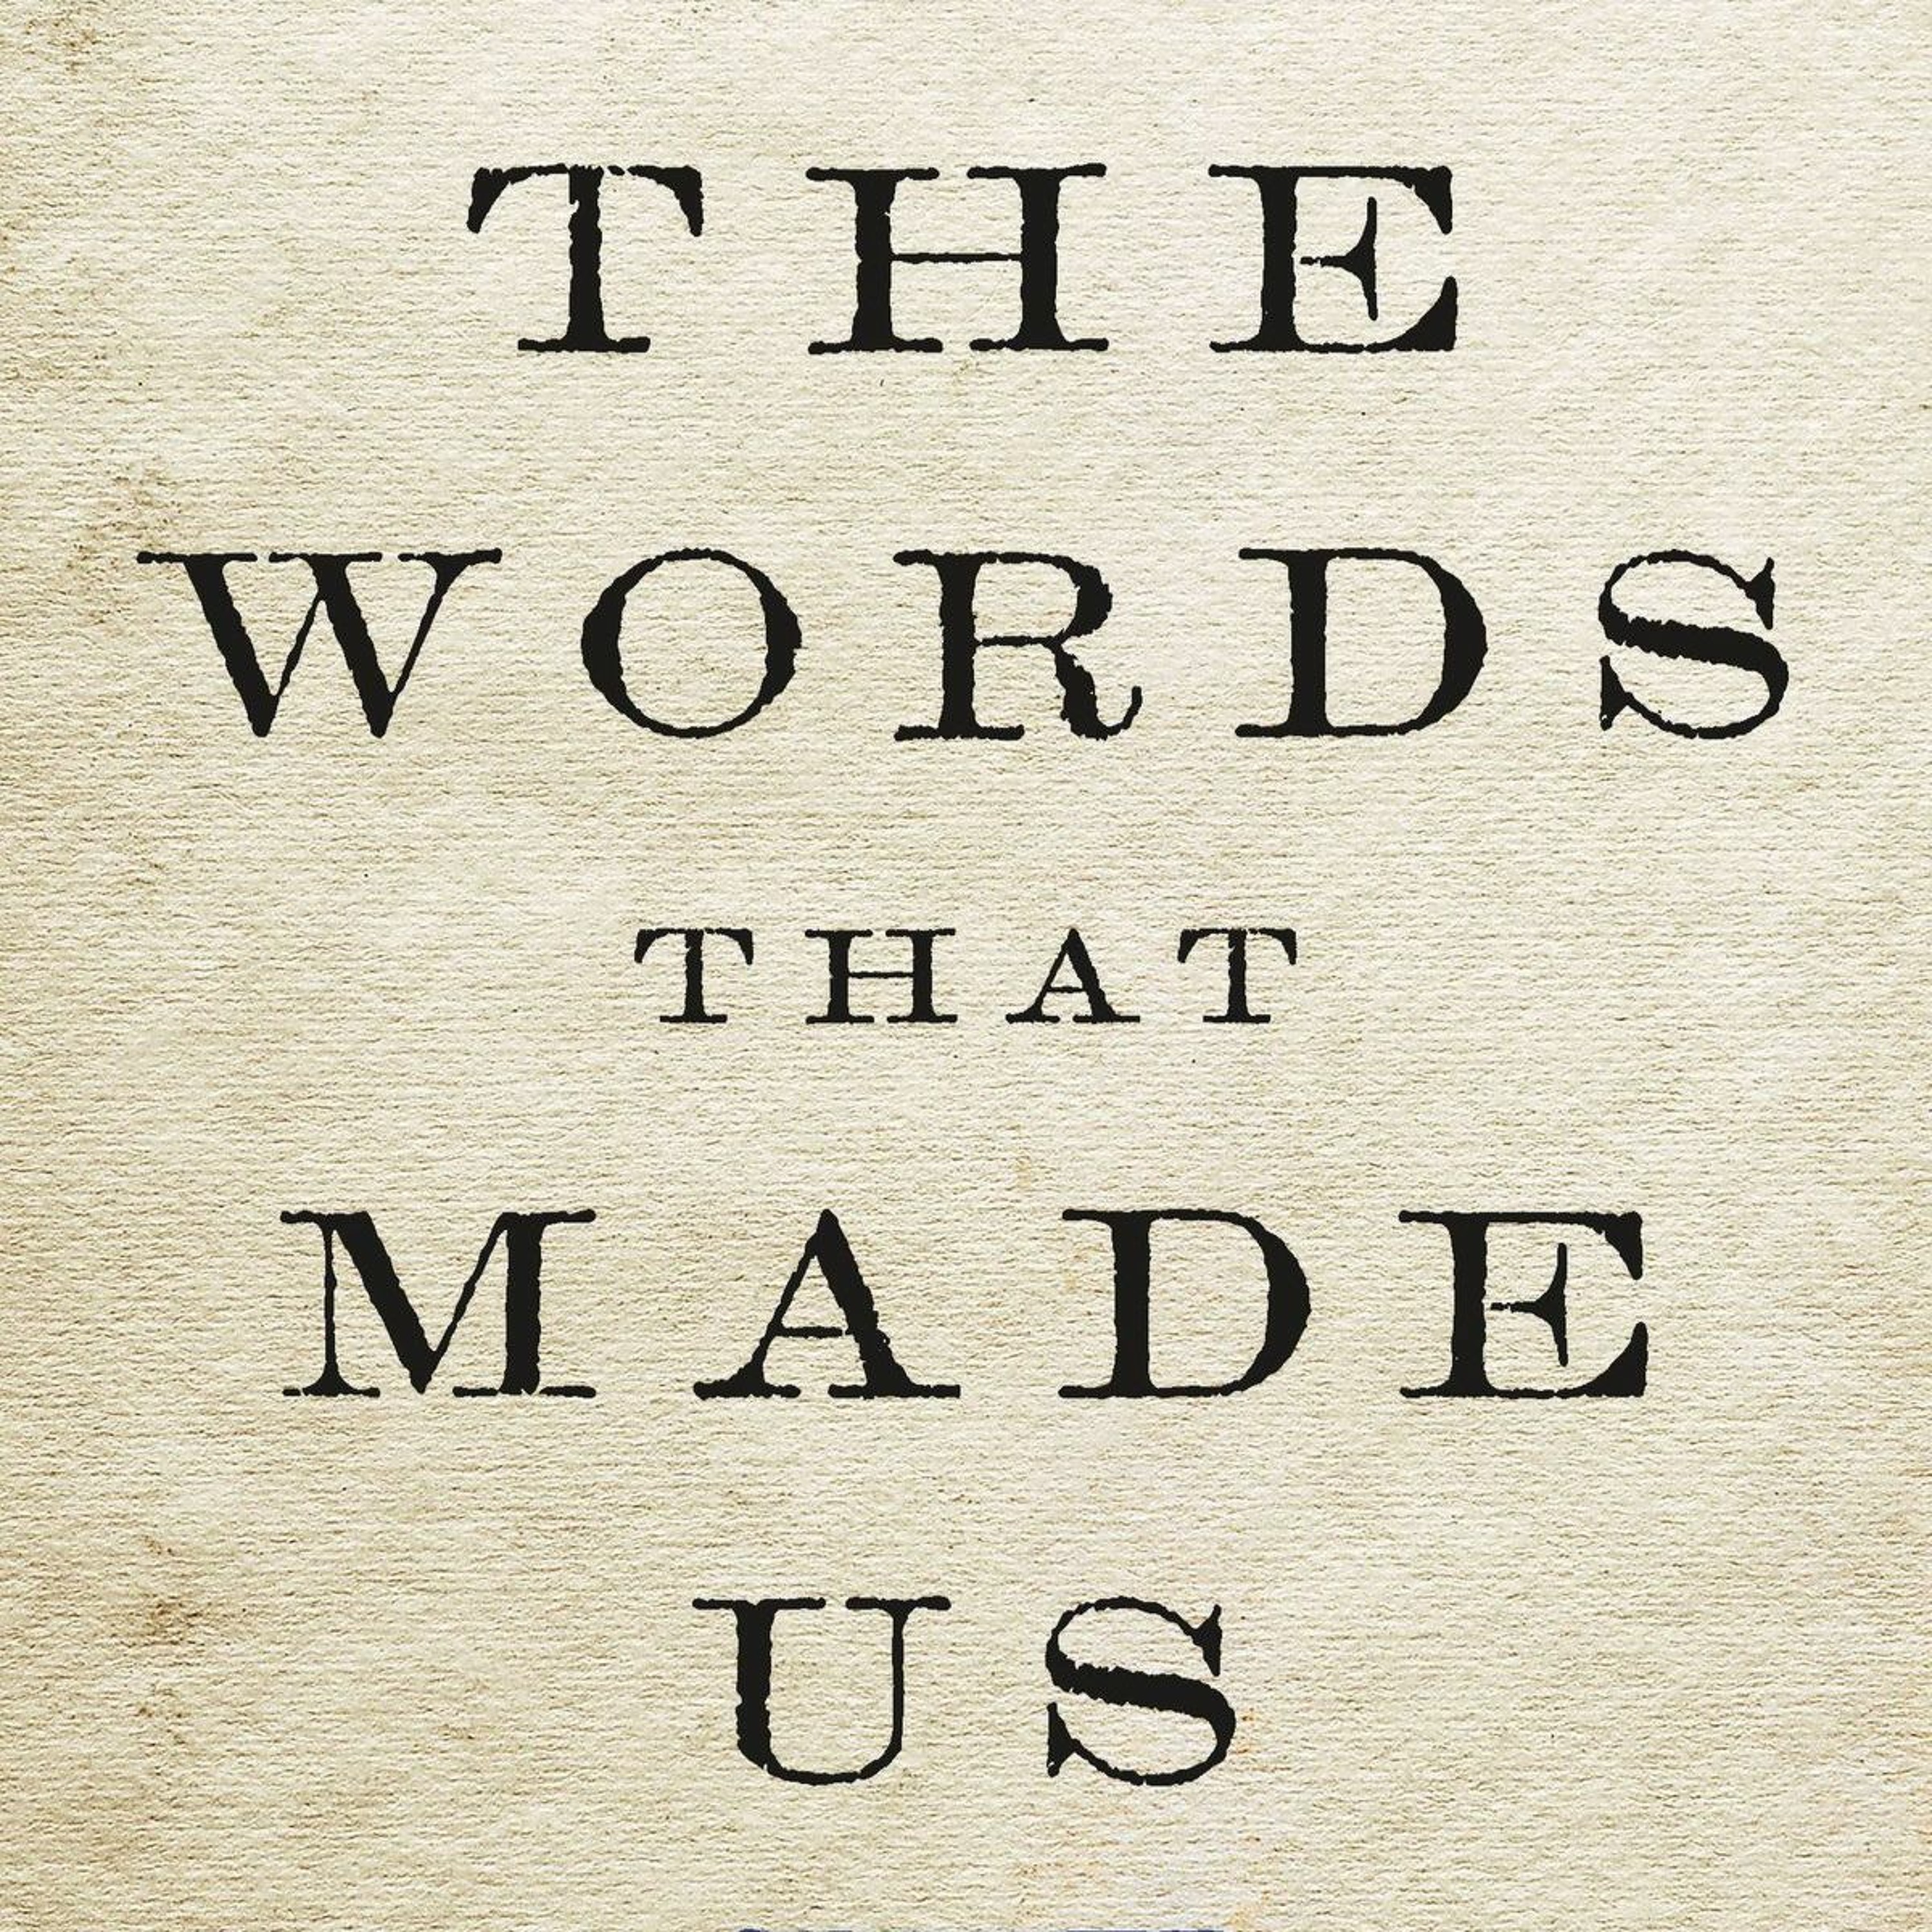 Akhil Reed Amar, ”The Words that Made Us: America’s Constitutional Conversation, 1760-1840”